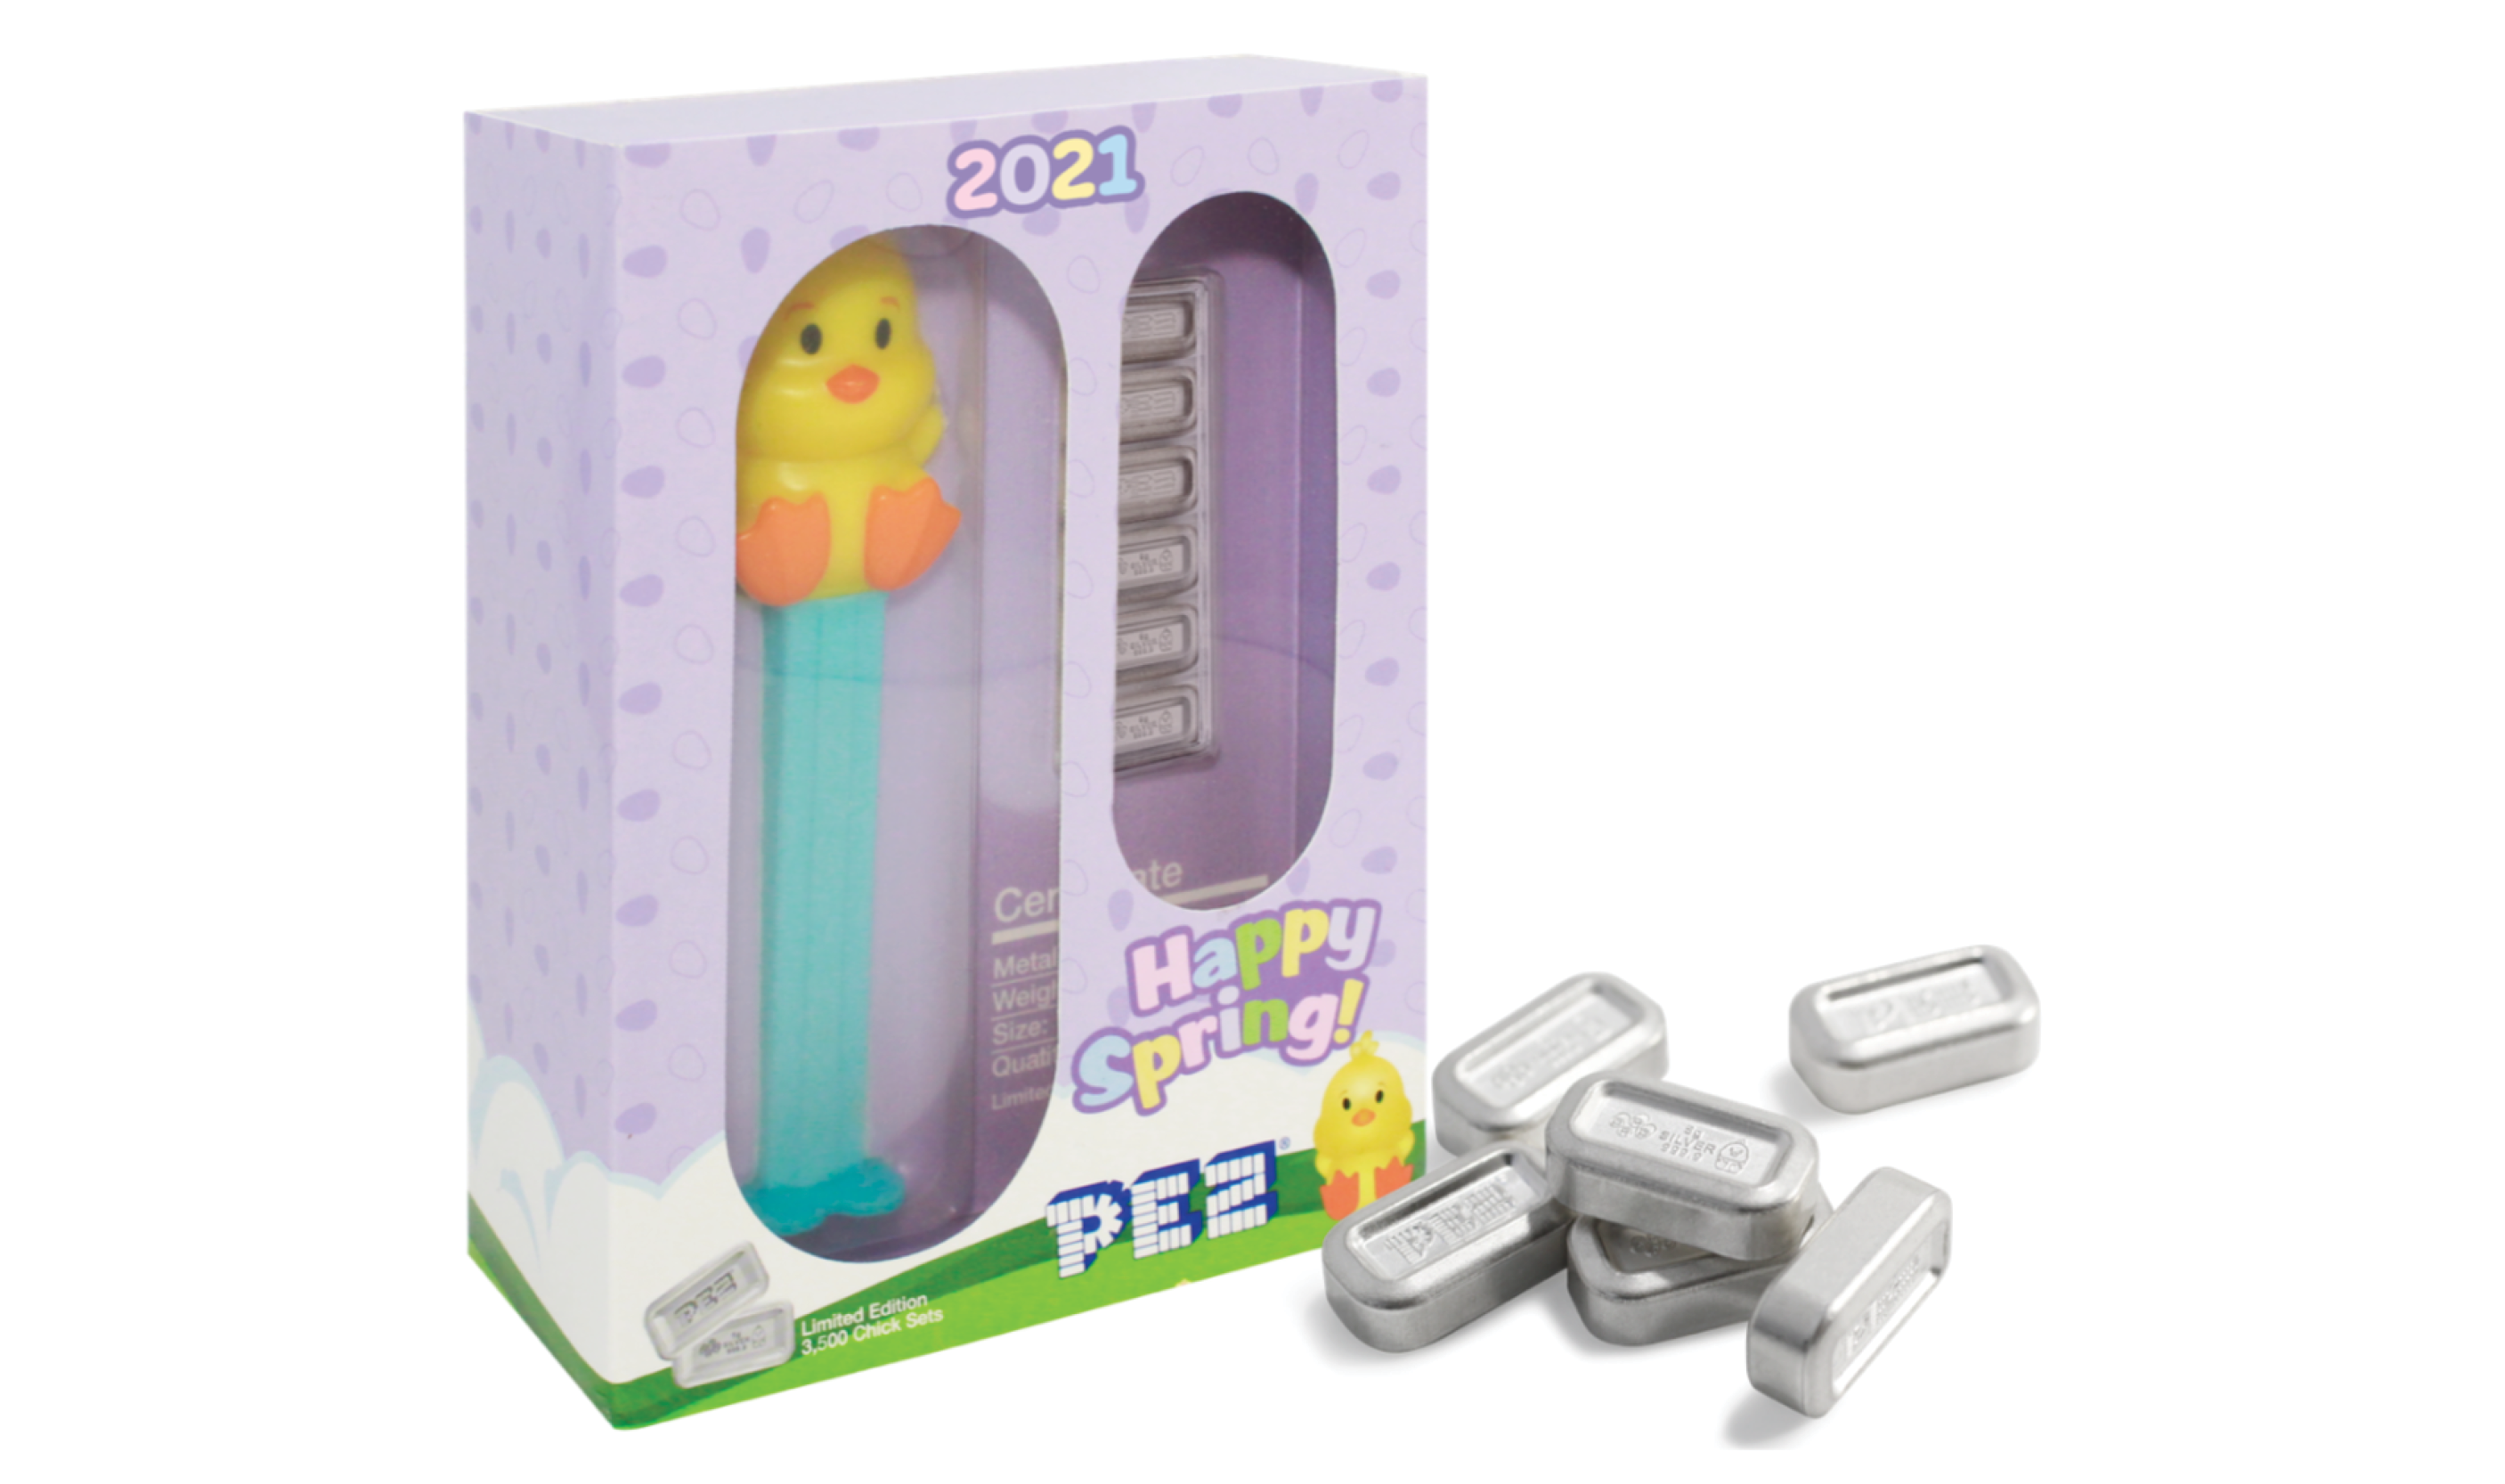 Feather your nest with this Limited release PAMP Pez Cheery Chick Pez Dispenser and silver cast bar